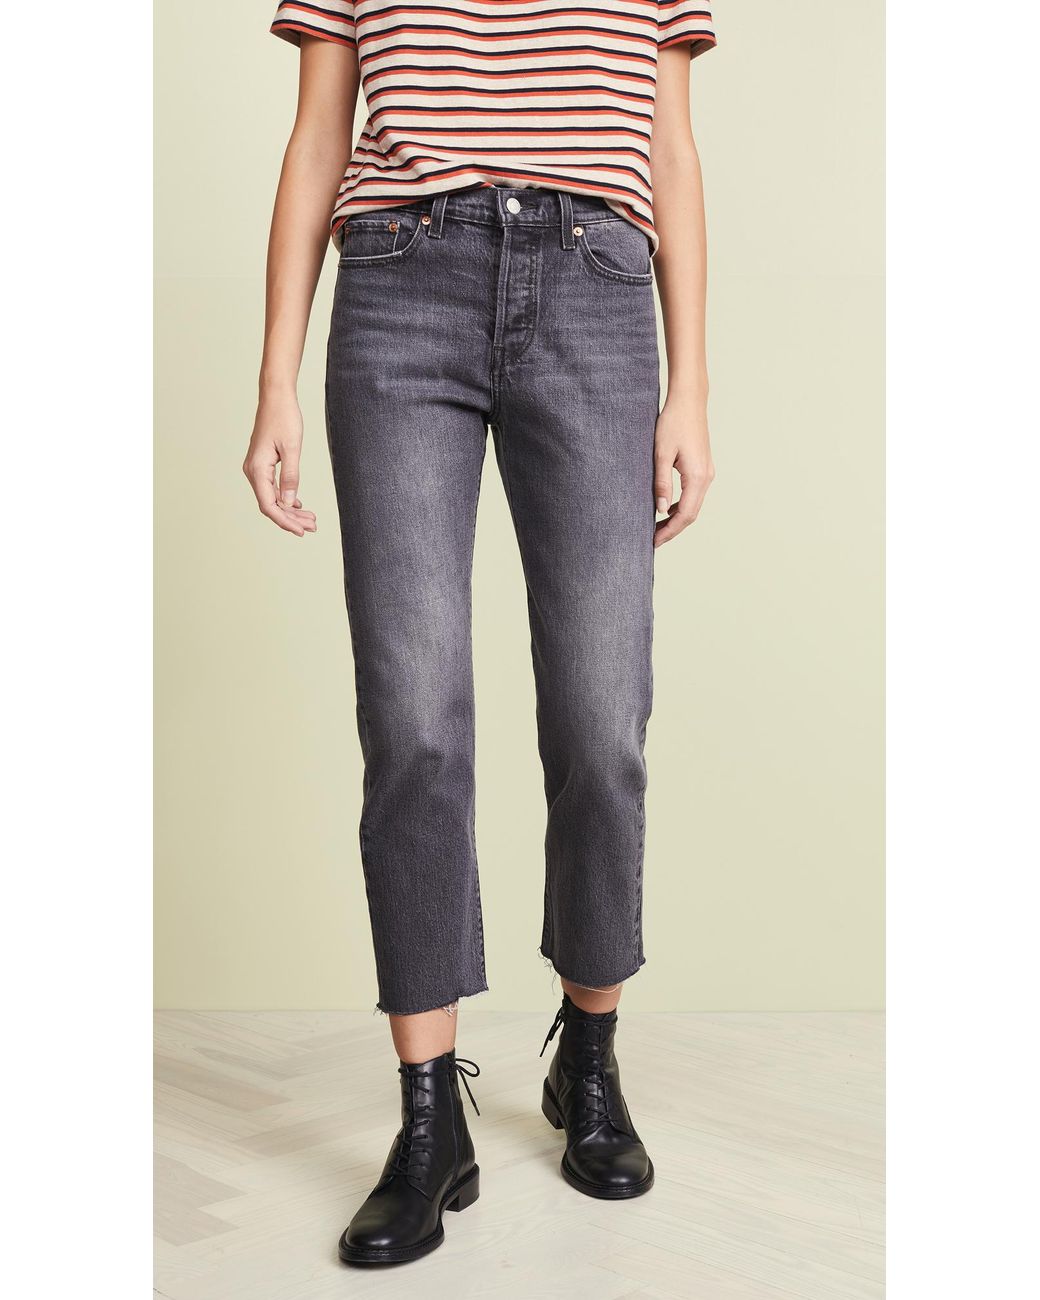 Levi's Wedgie Straight Jeans in Black | Lyst Canada